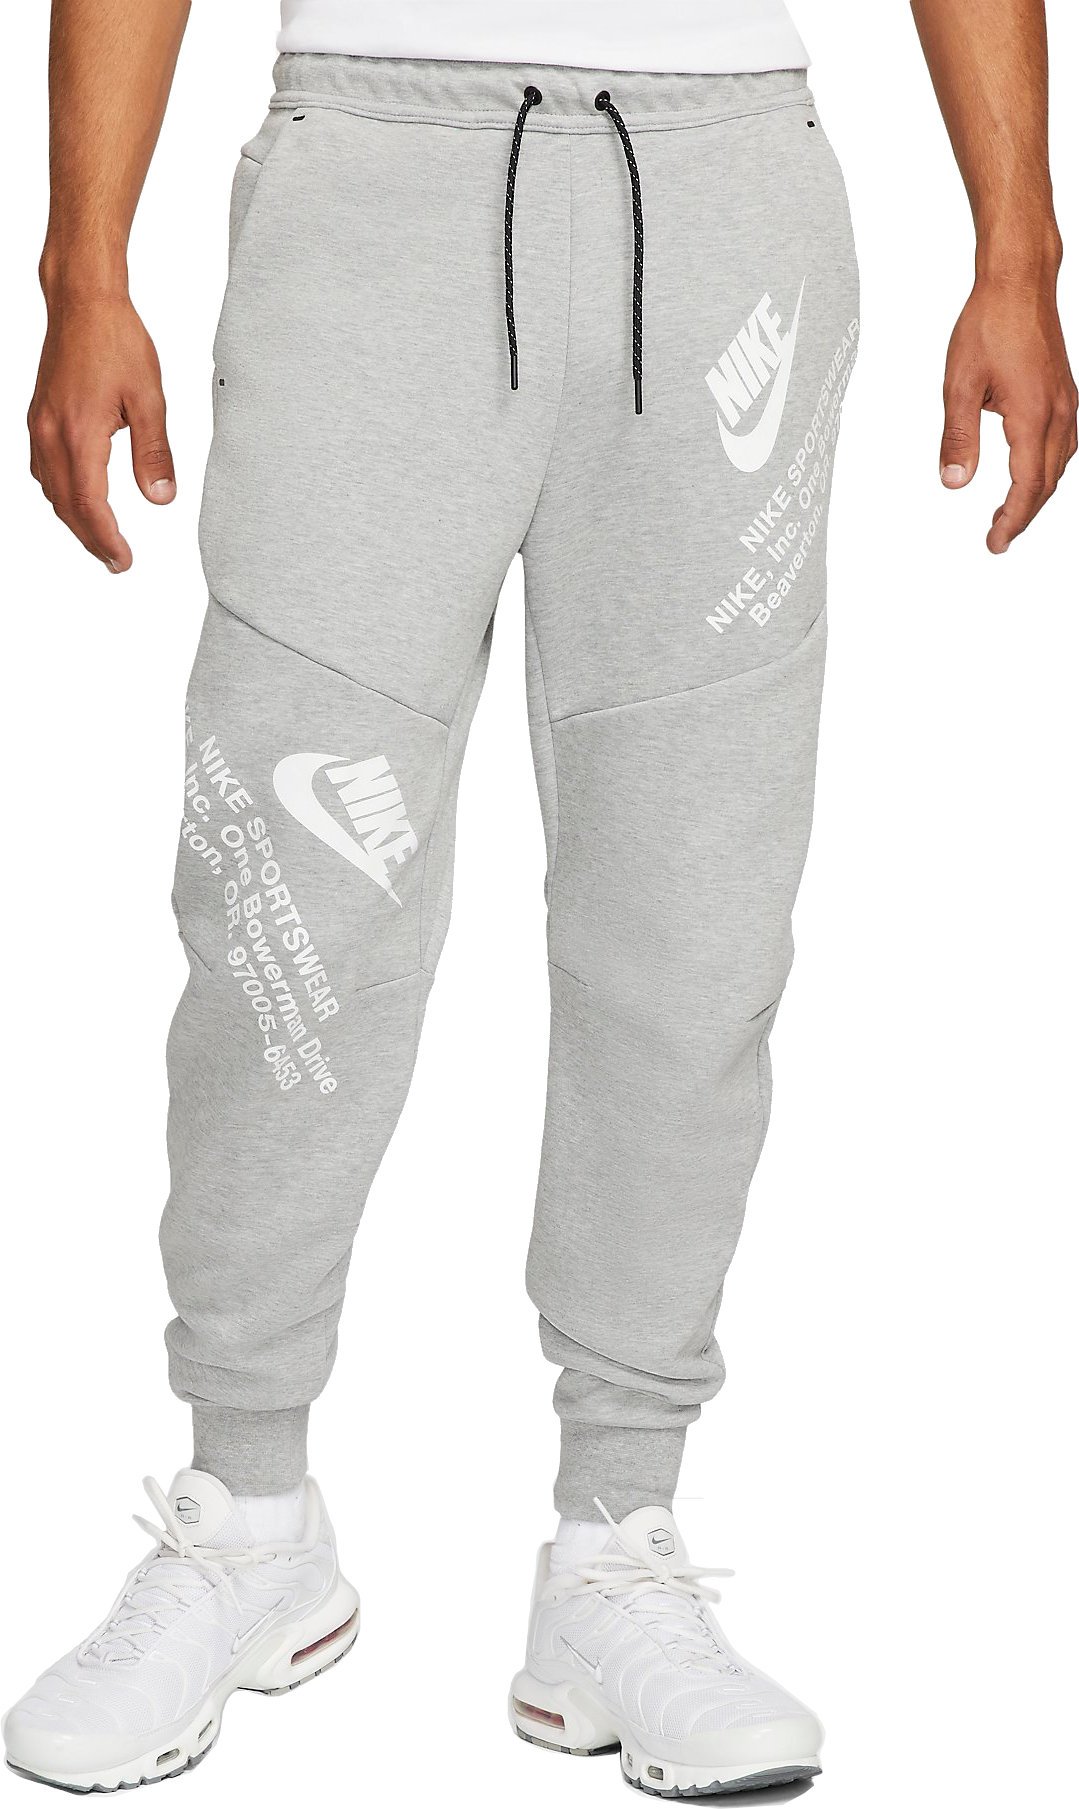 Nike sweat pants men – The Best Pants for Exercise缩略图